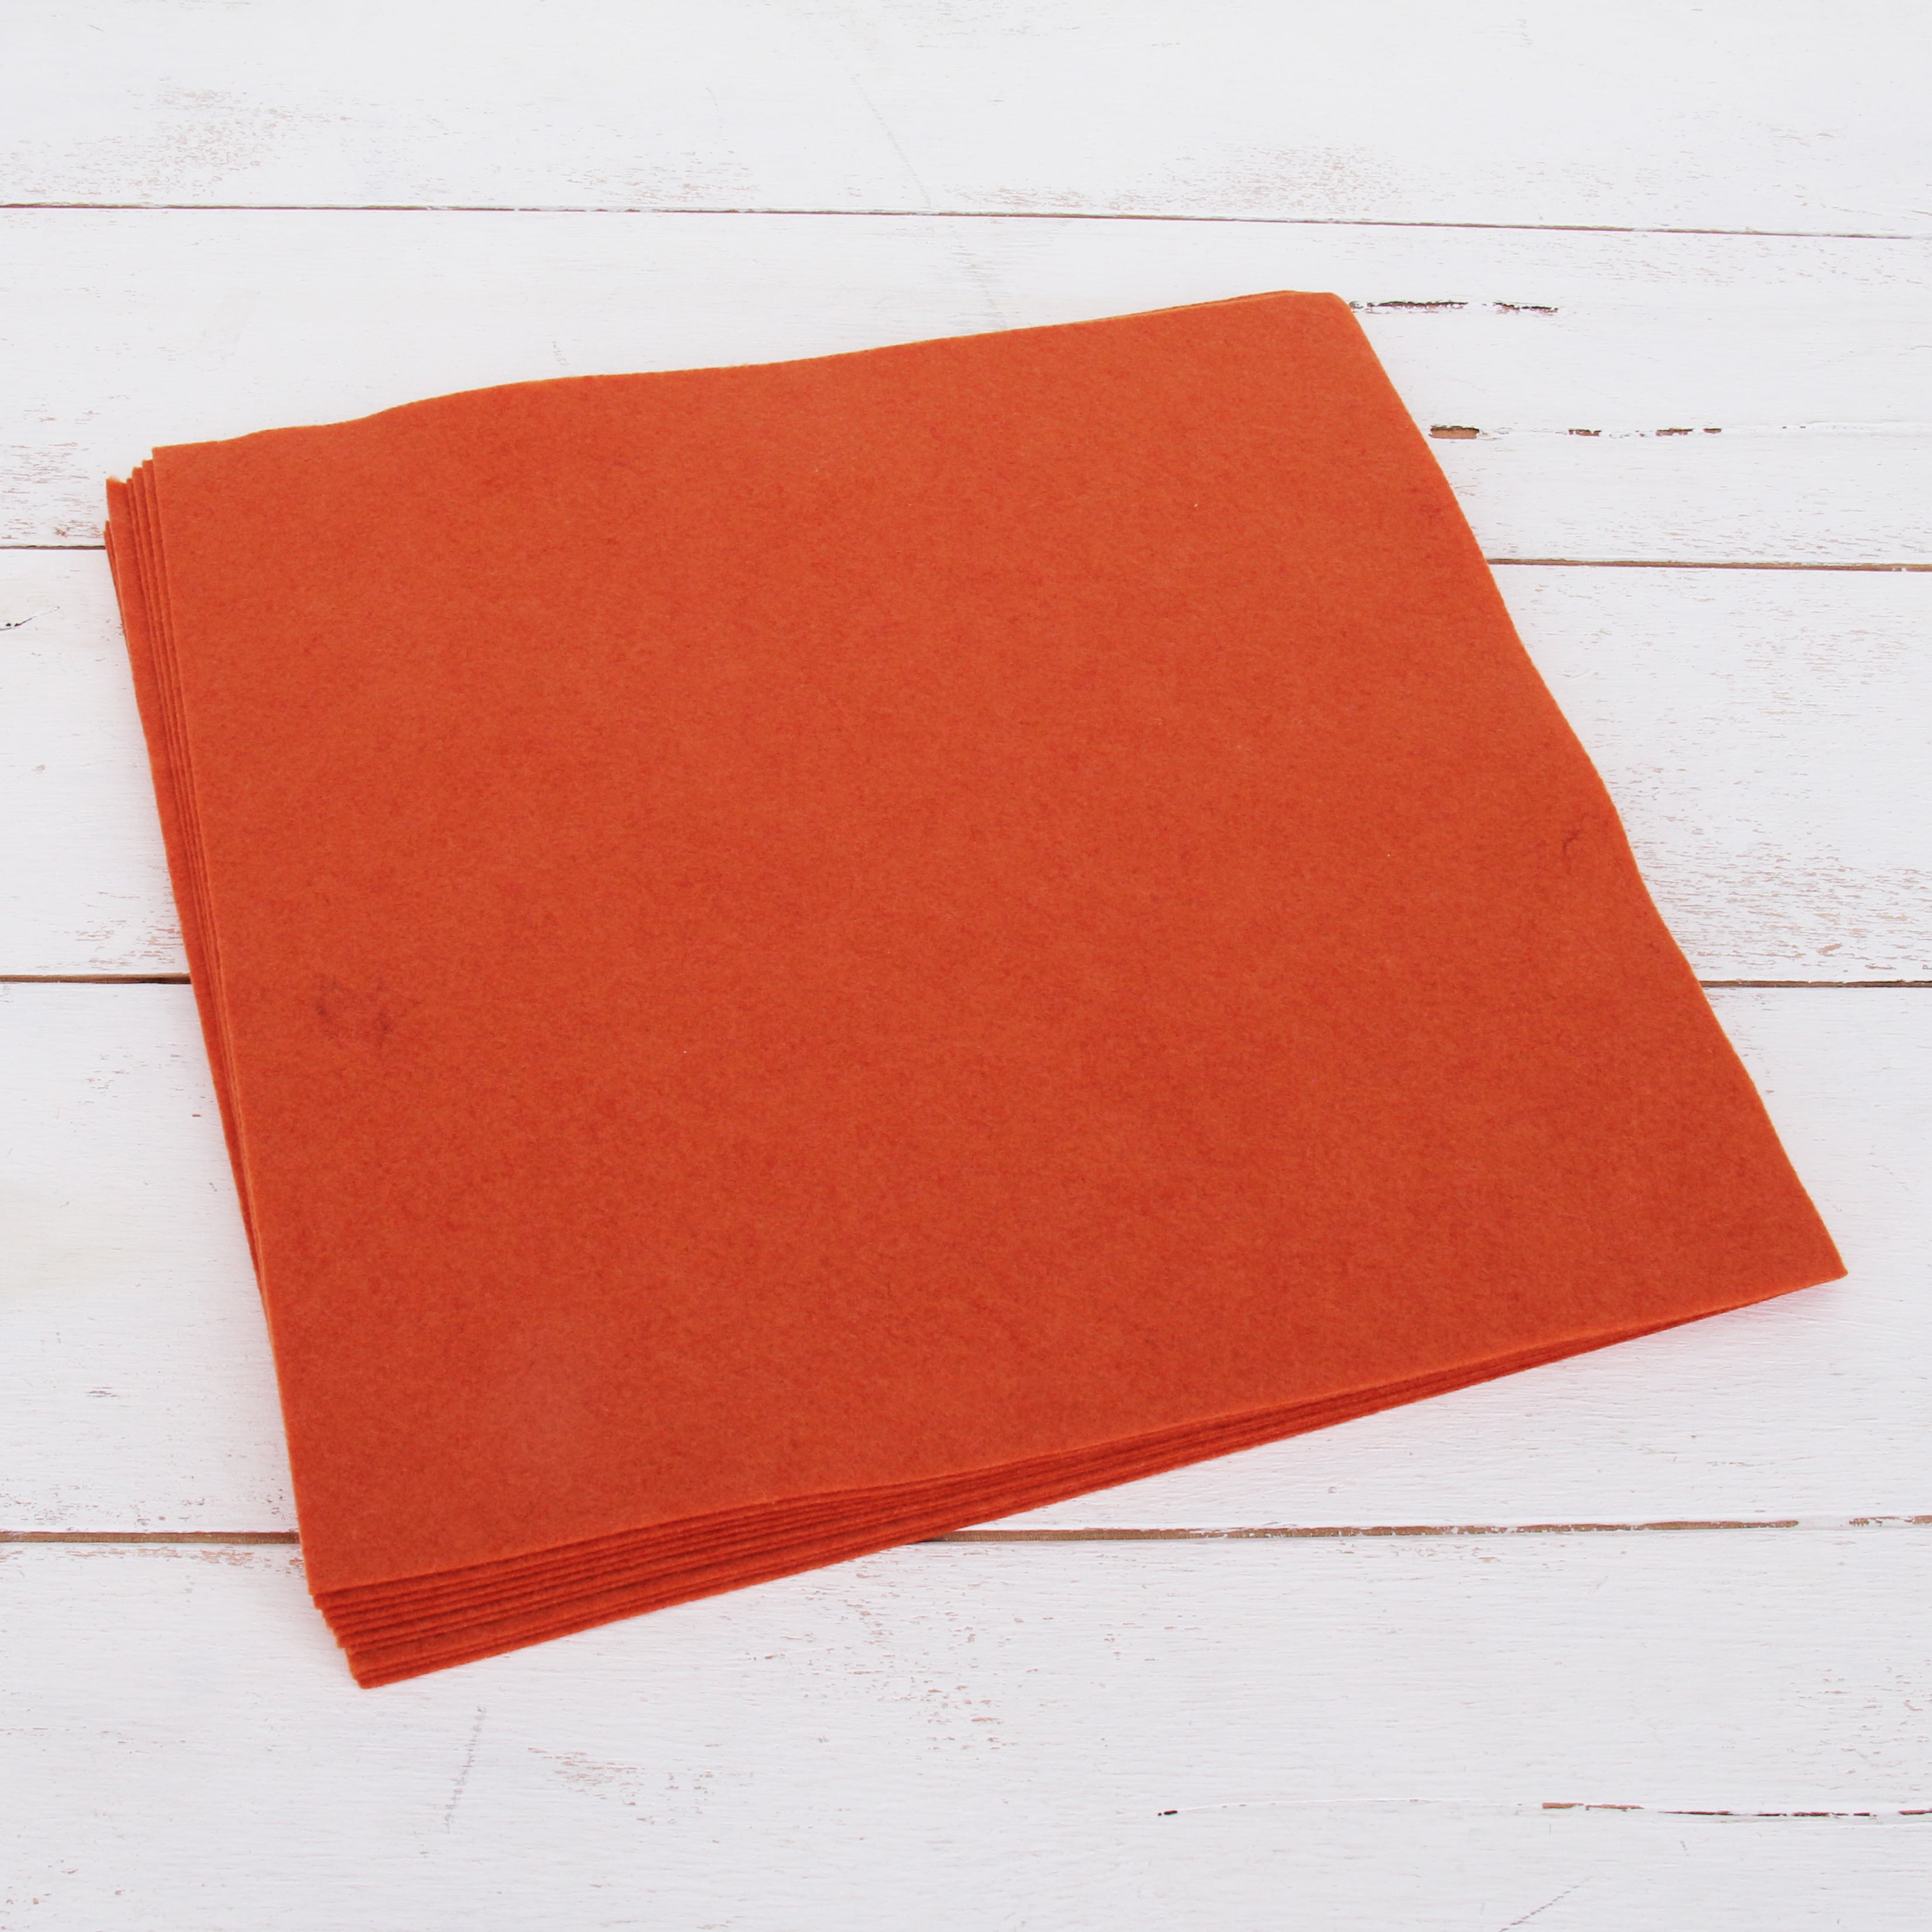 AnyDesign 20Pcs Fall Felt Fabric Sheets Green Orange Red Brown Soft Felt  Craft Fabric Sewing Fabric Sheets Patchwork Thick Felt Pack for Autumn DIY